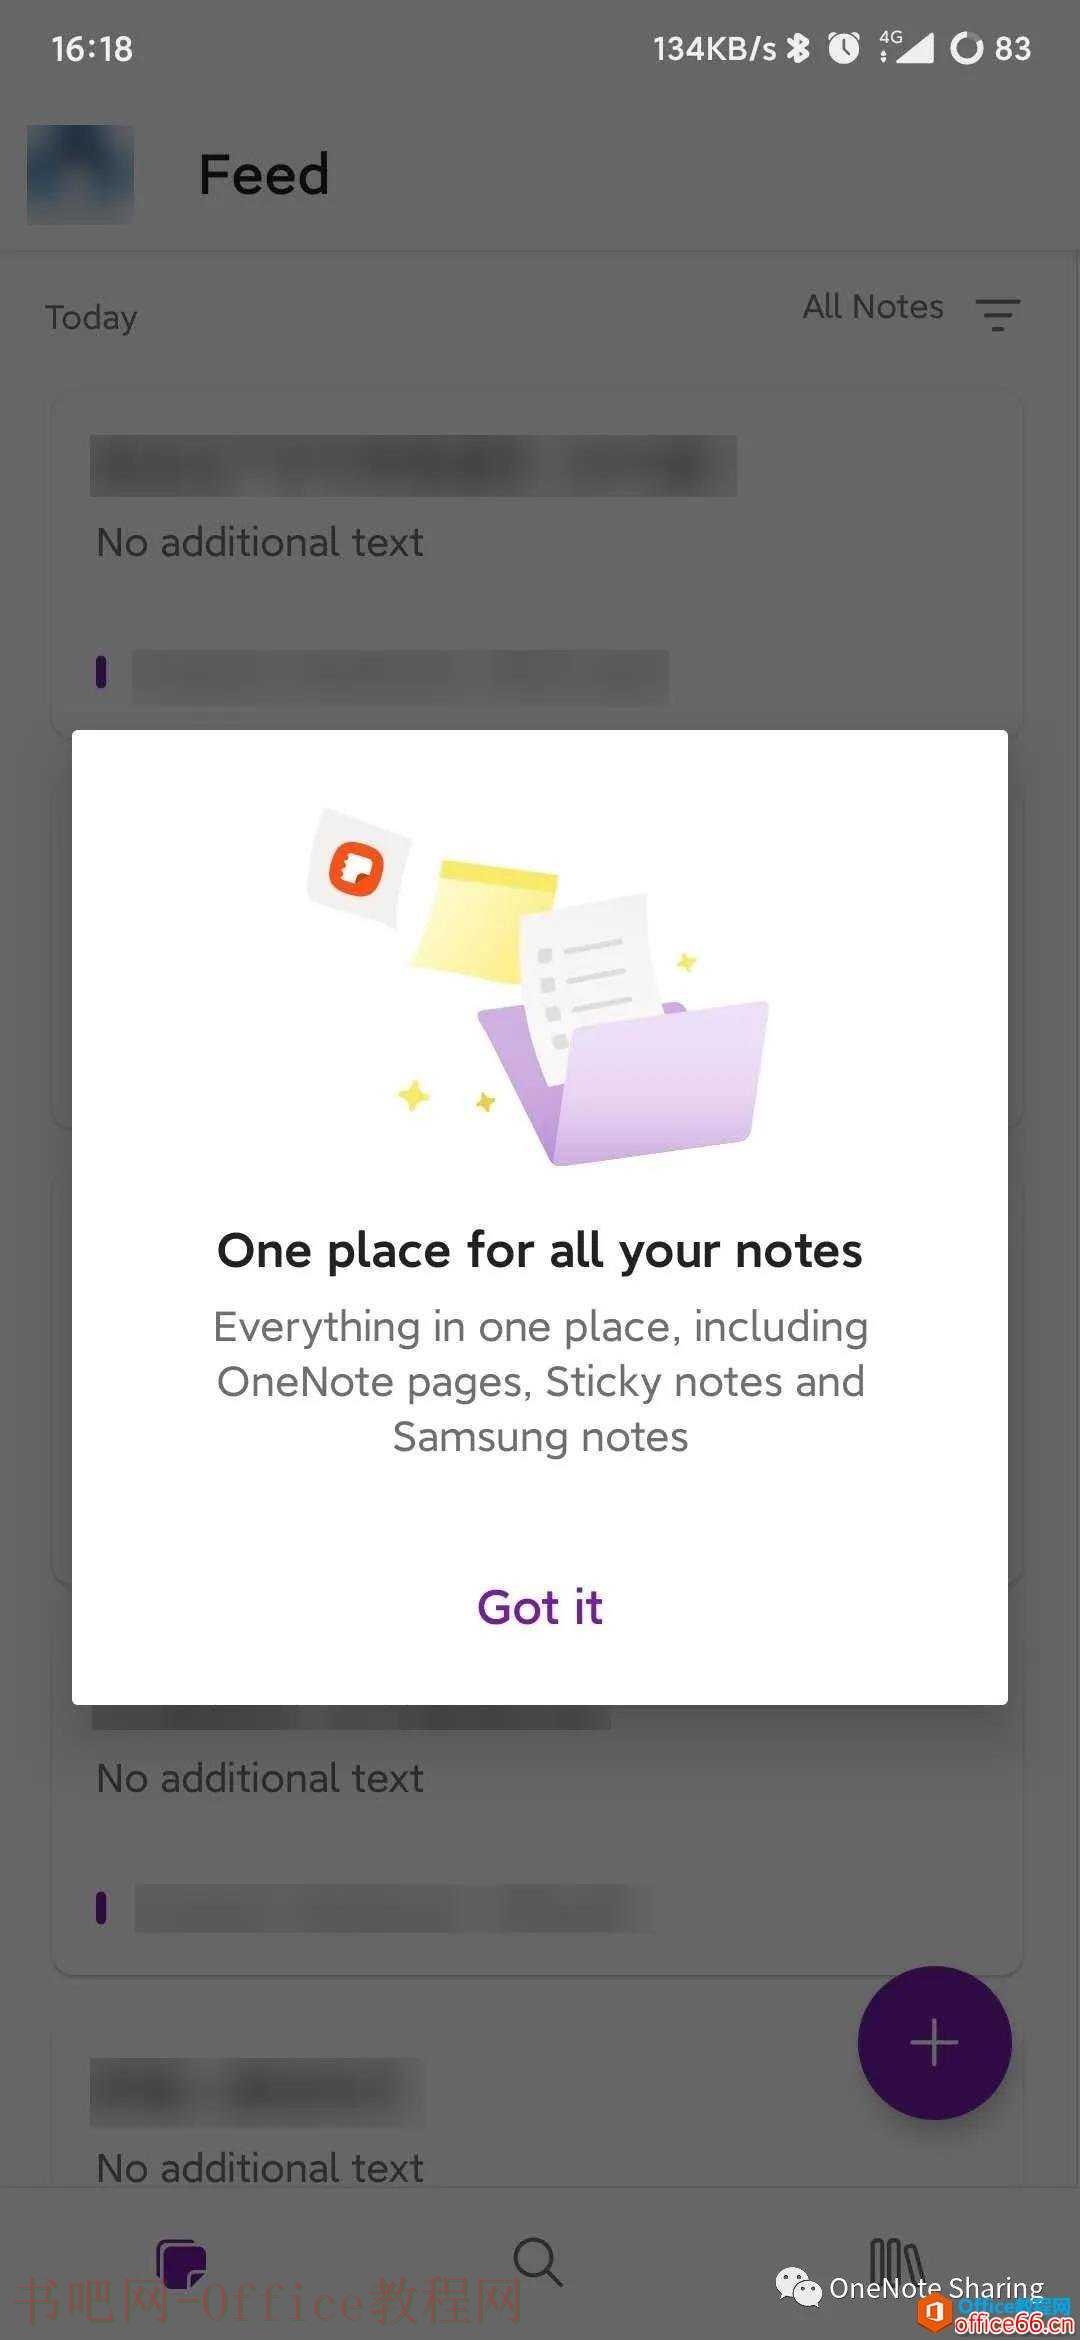 OneNote for Android UI界面大改！默认主页Feed时间线1